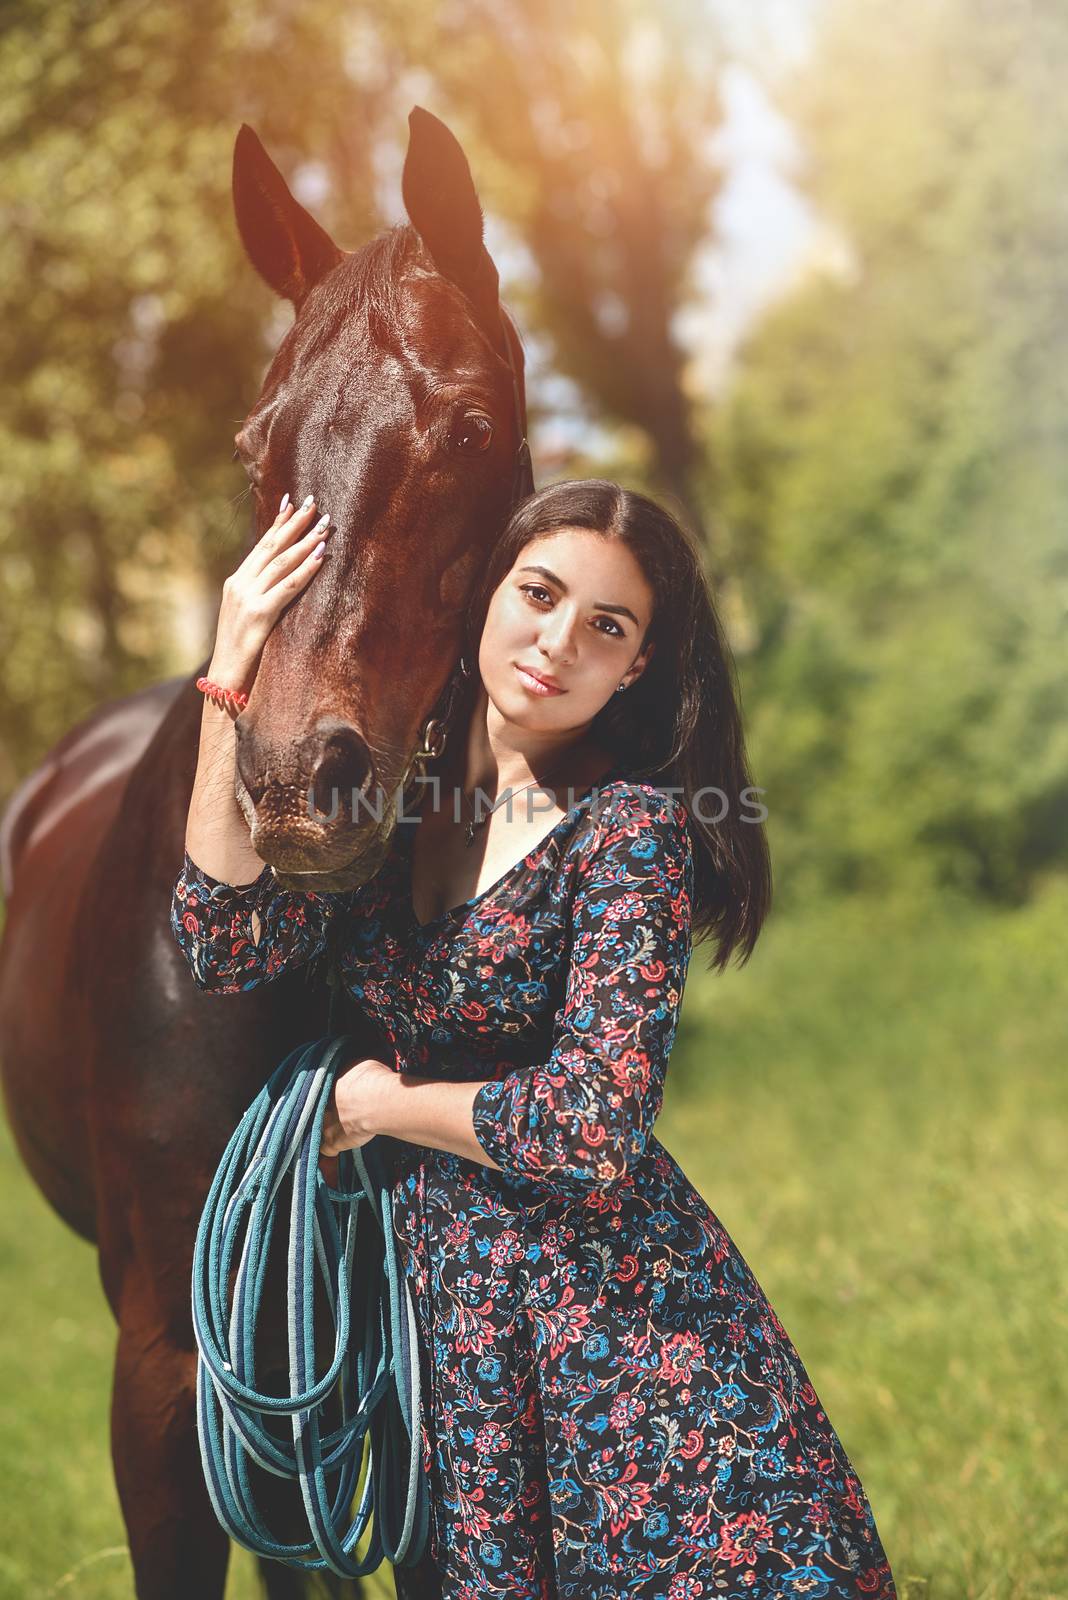 Beautiful Latin woman in dress and her lovely horse walk in the forest. love animals concept. love horses by Nickstock